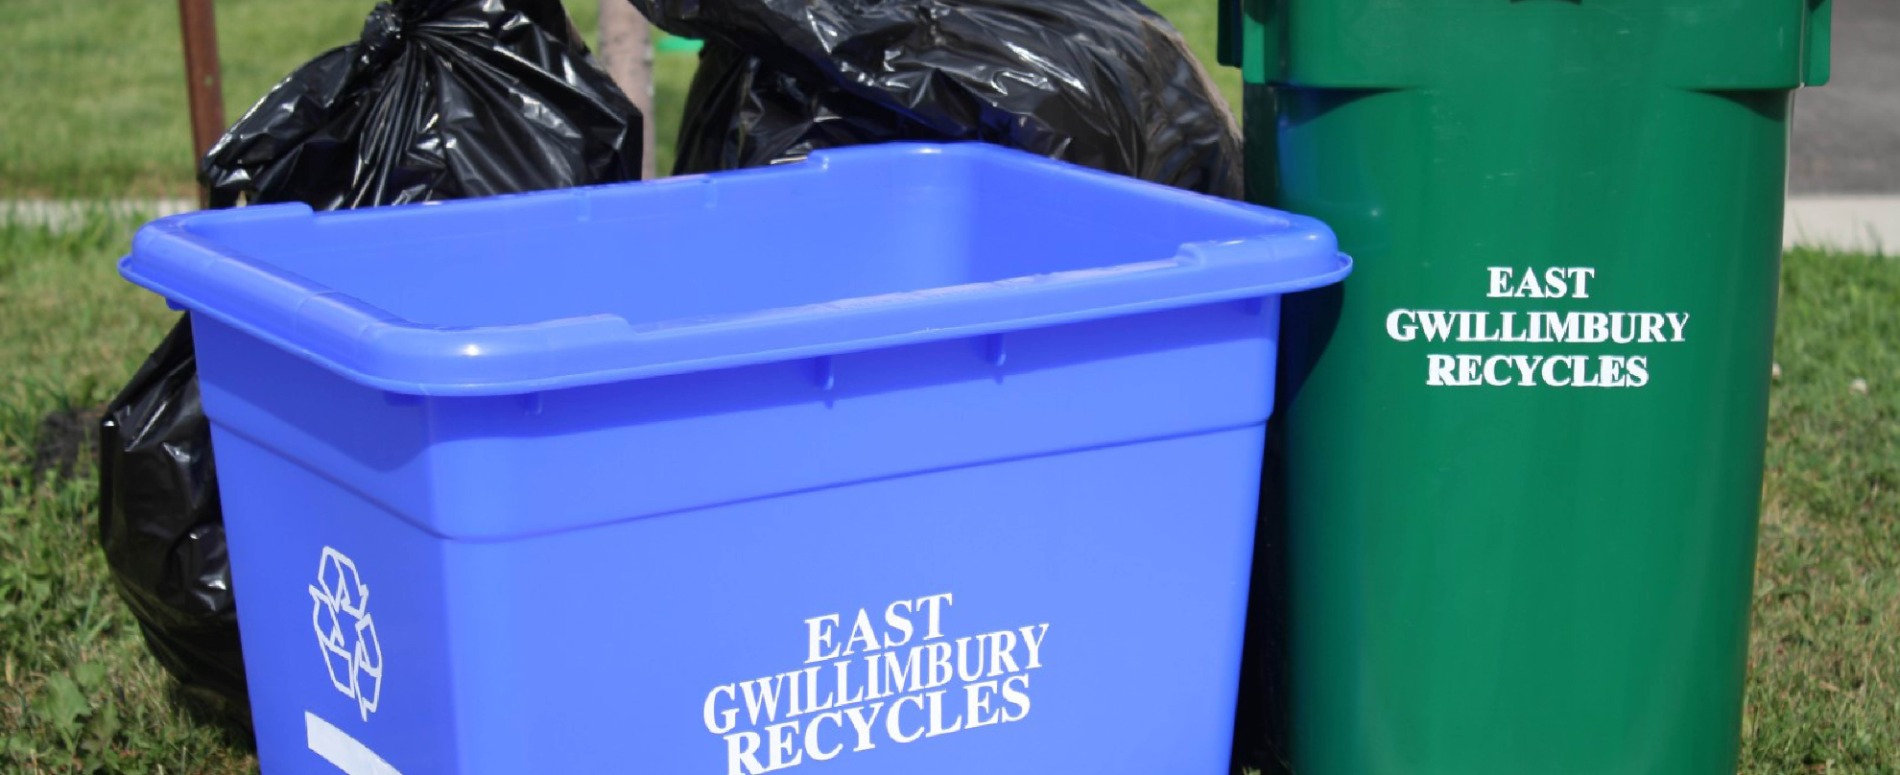 EG recycle and green bins